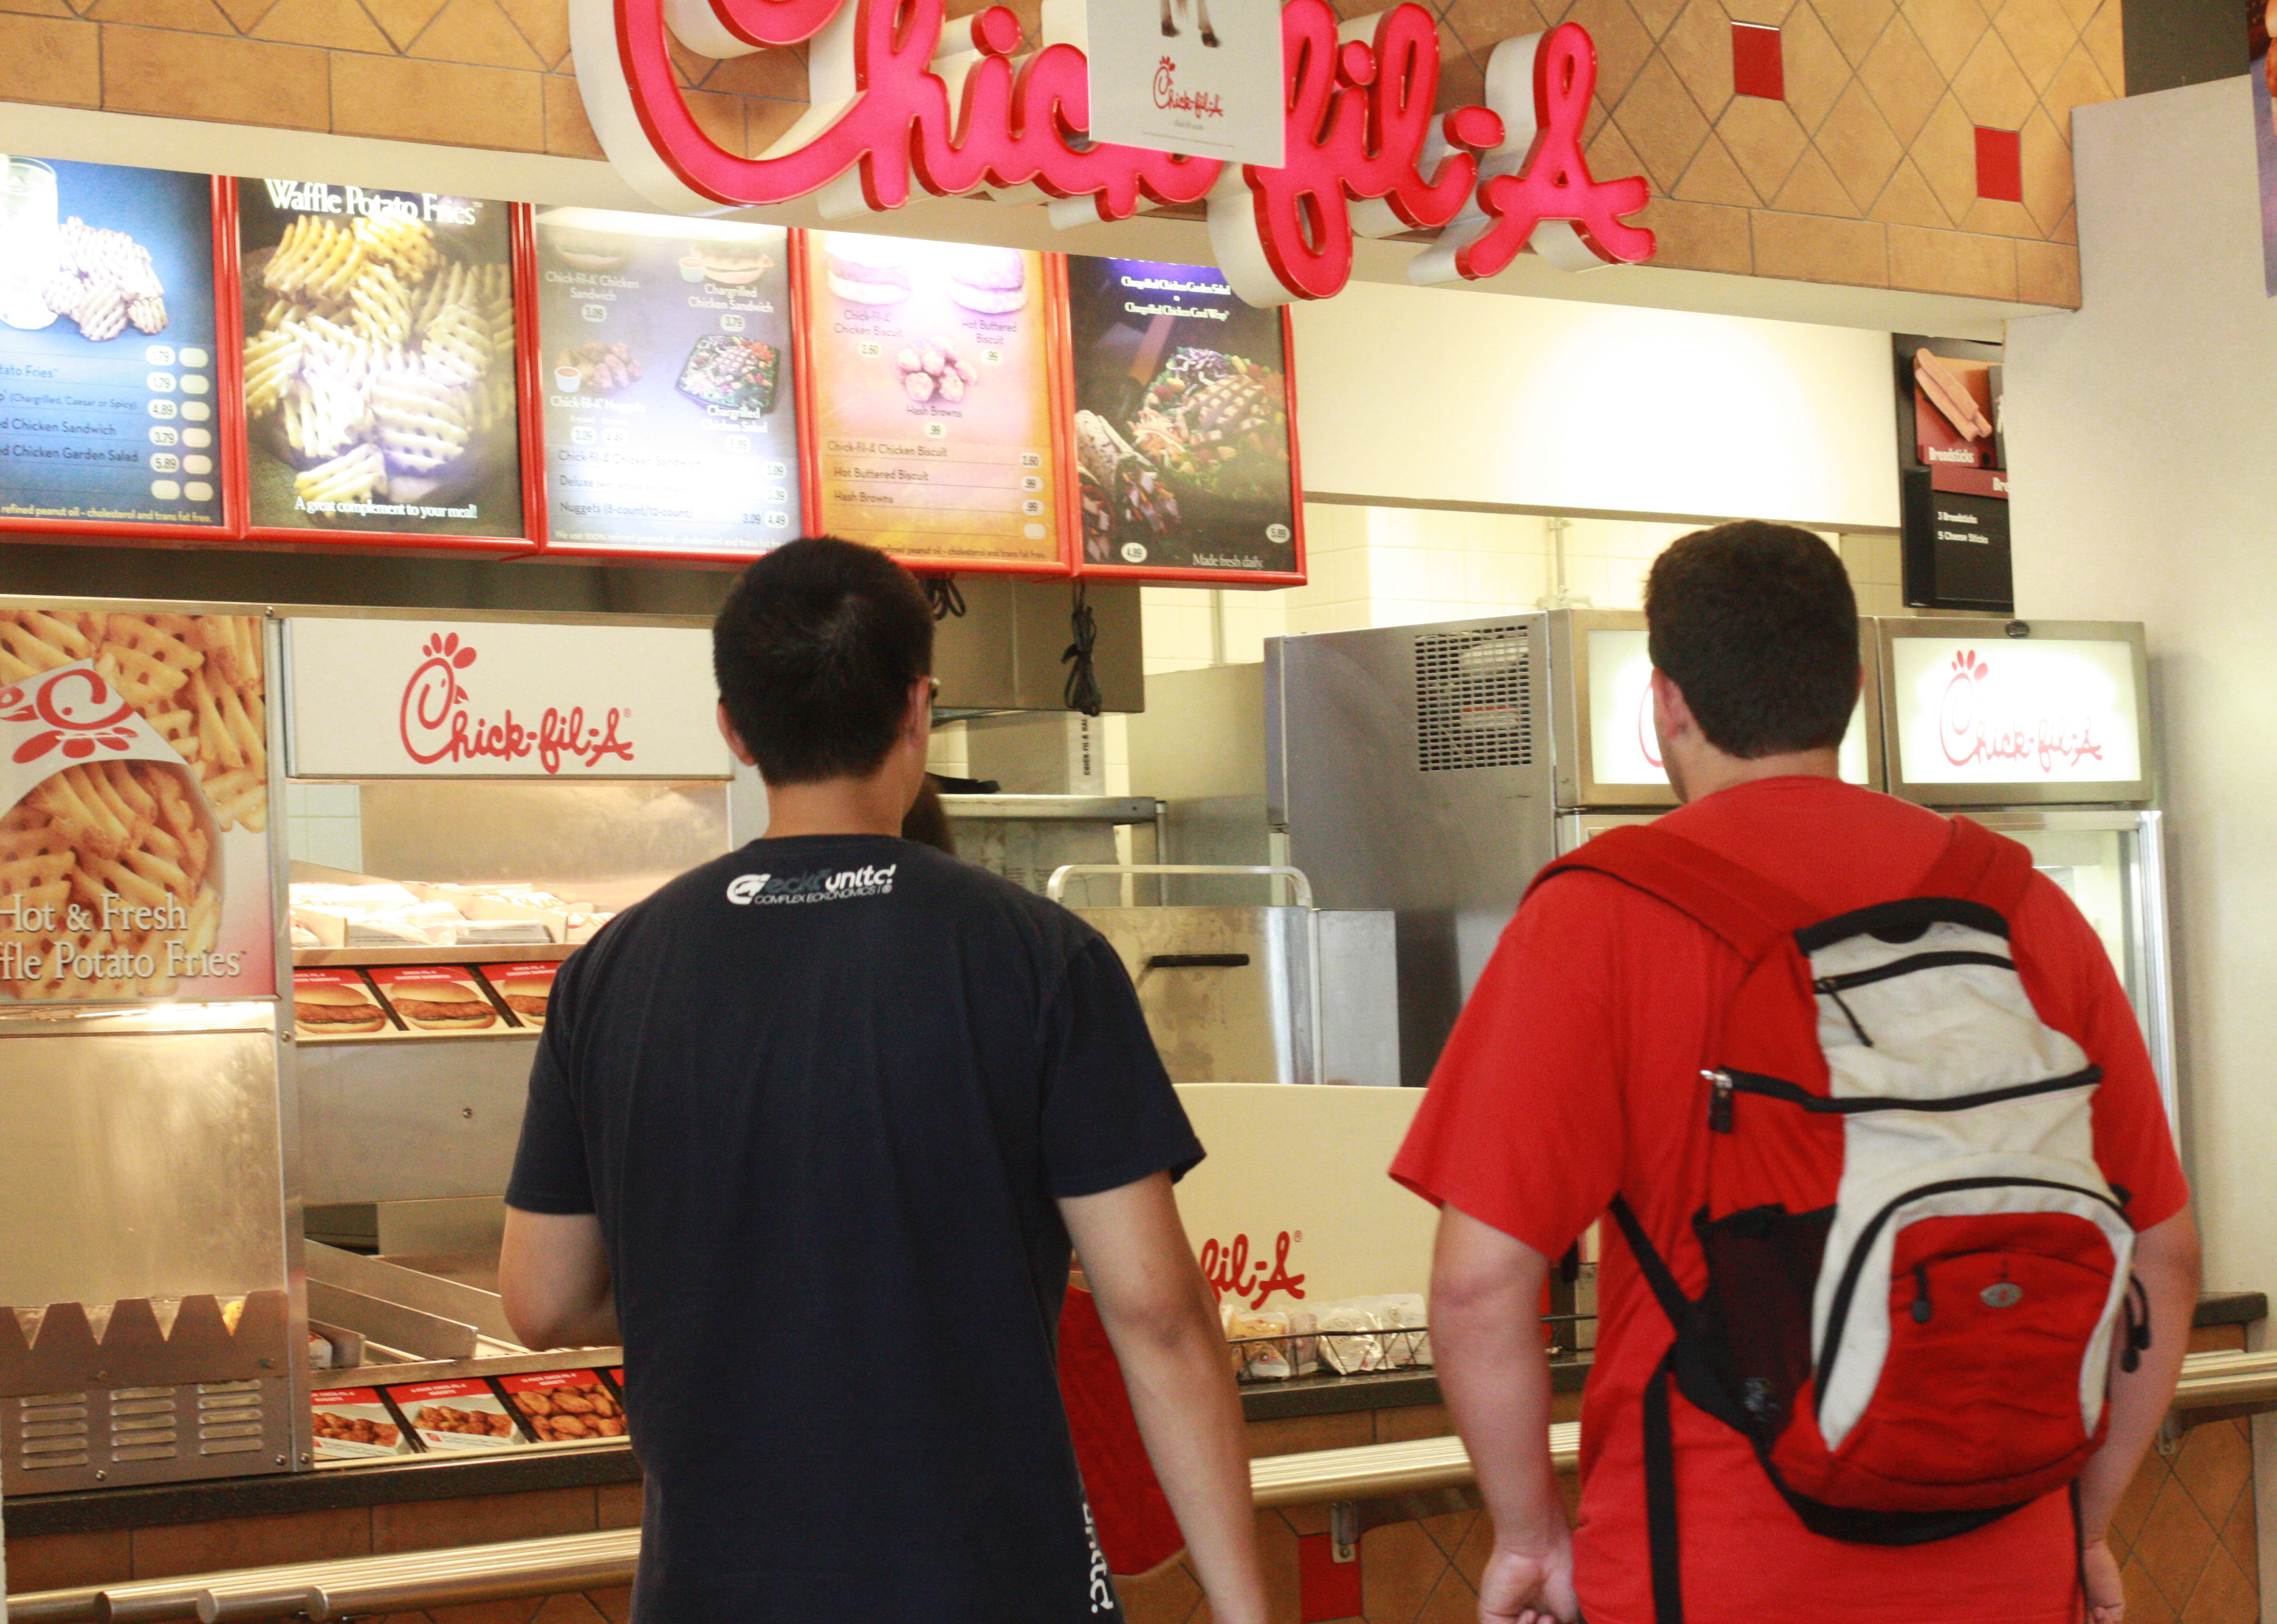 Committee Calls for Chick-fil-A’s Removal